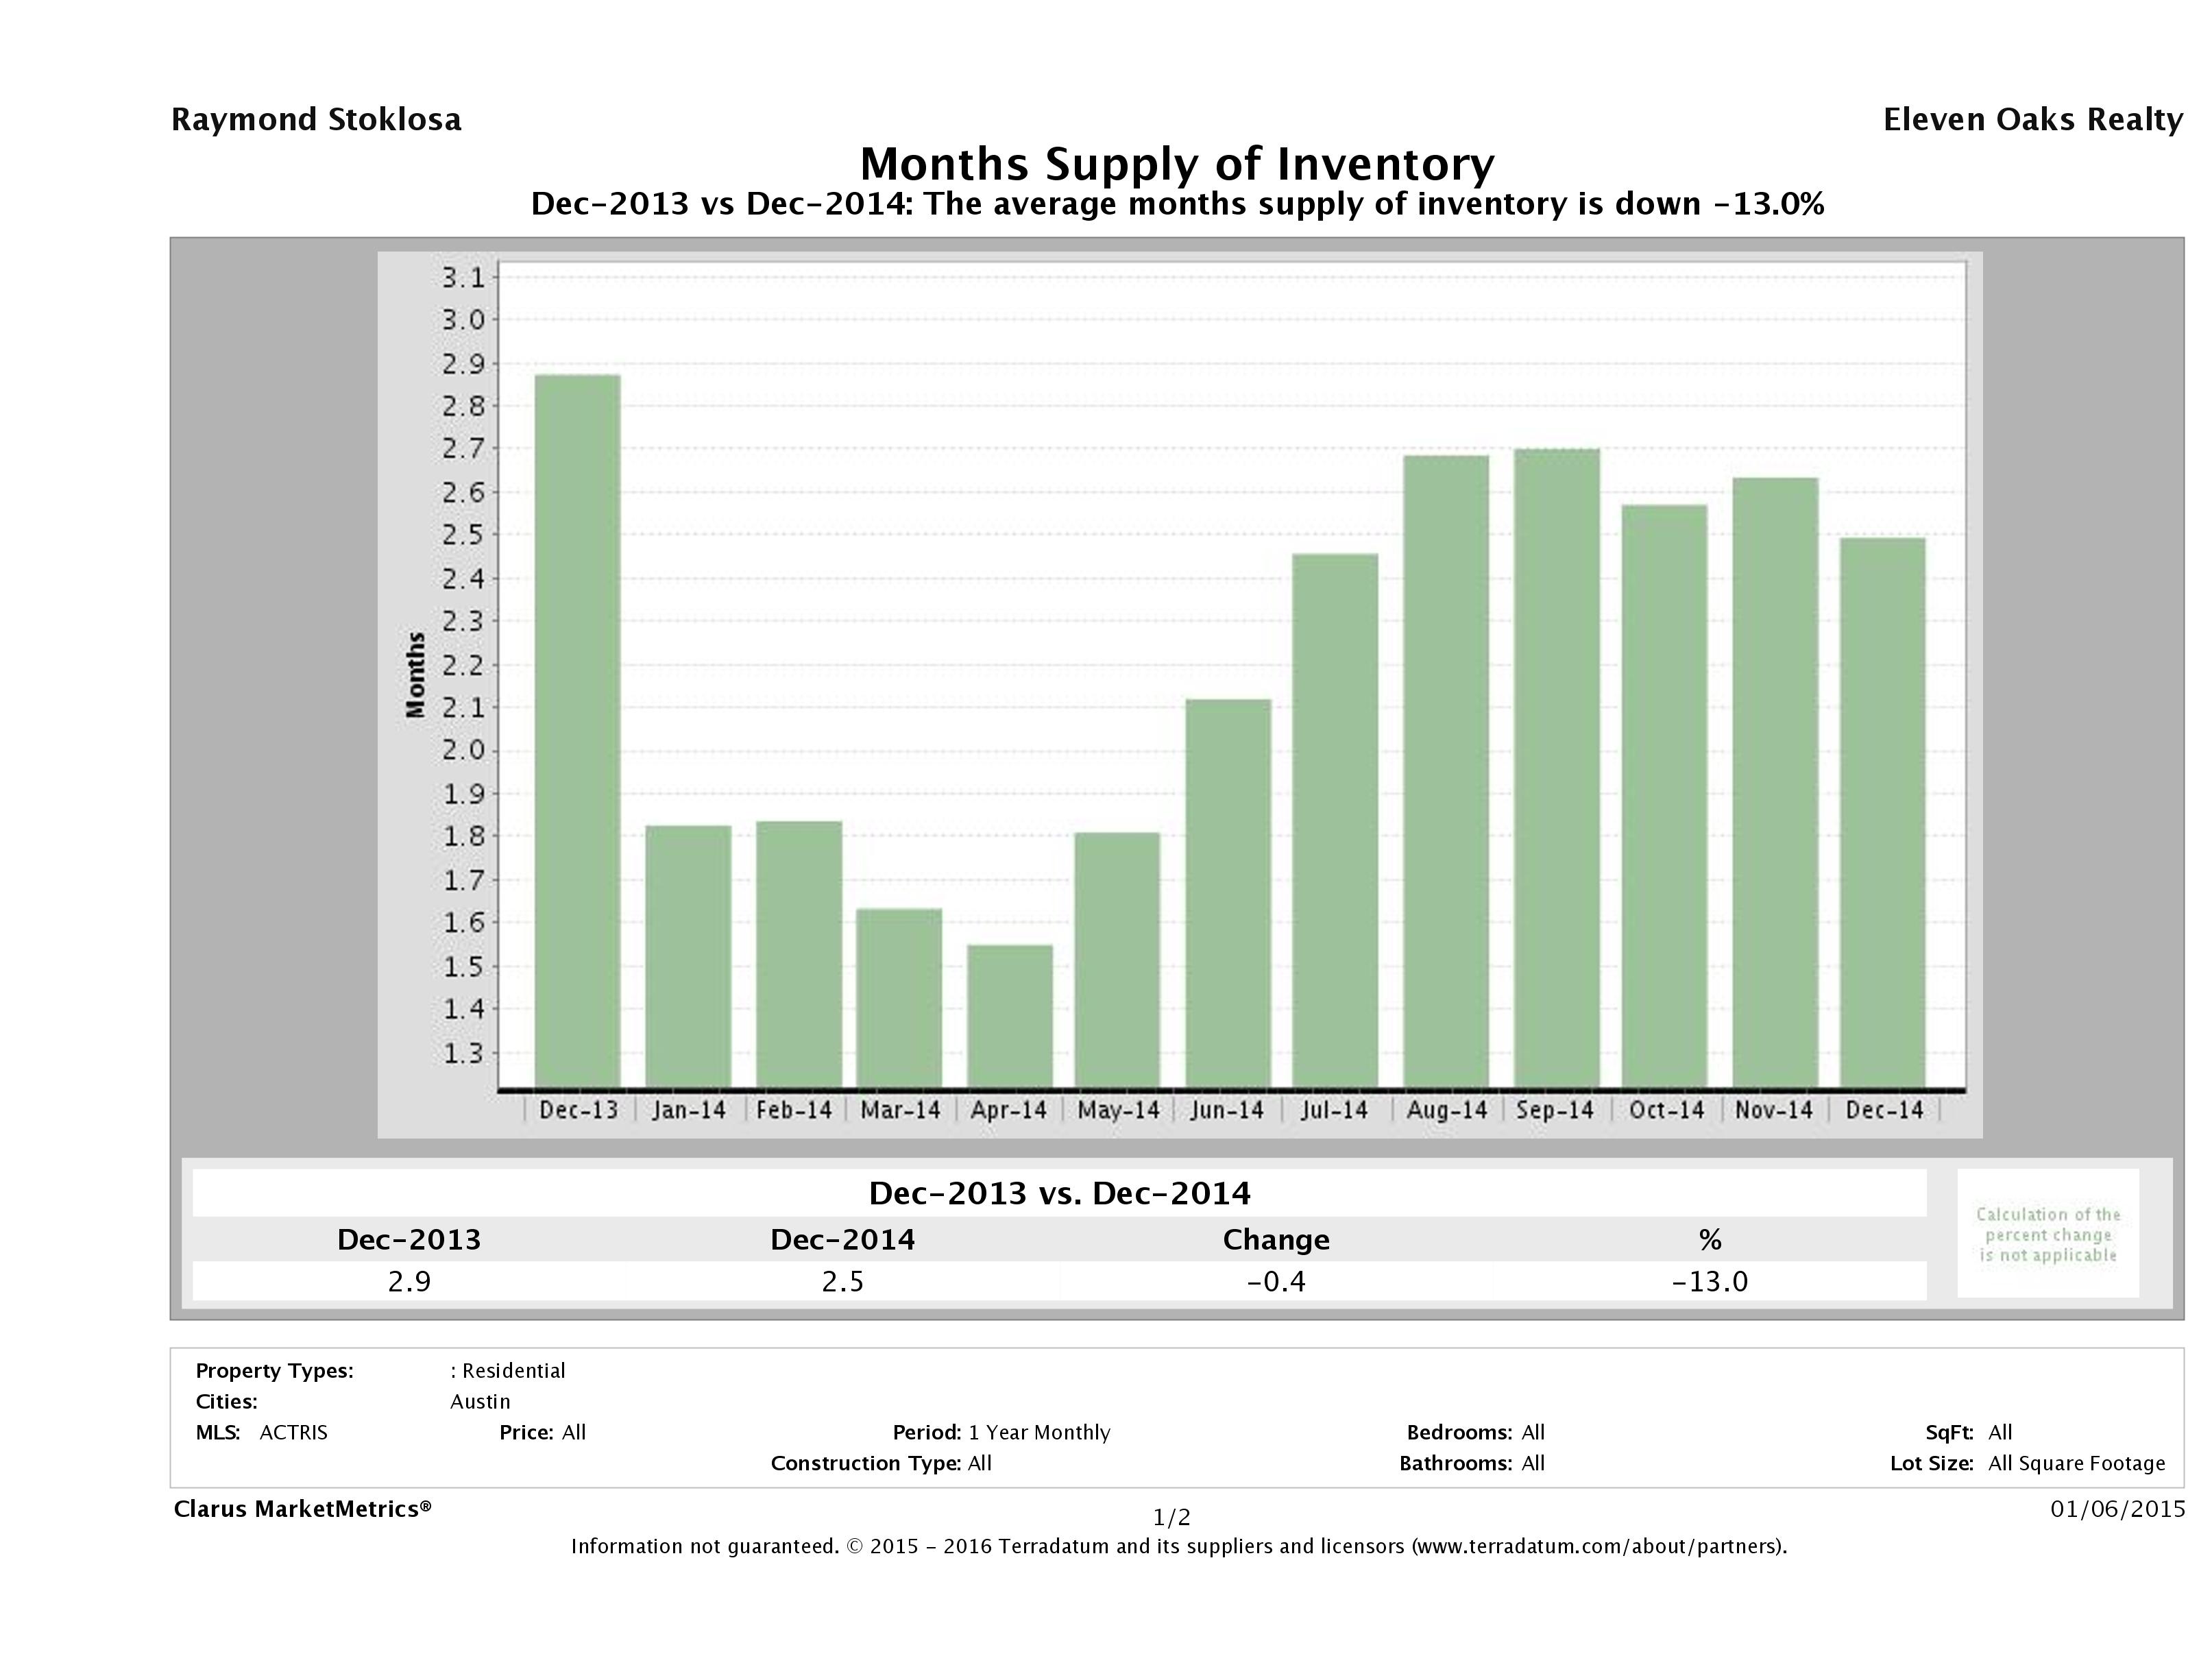 Austin single family home months inventory December 2014